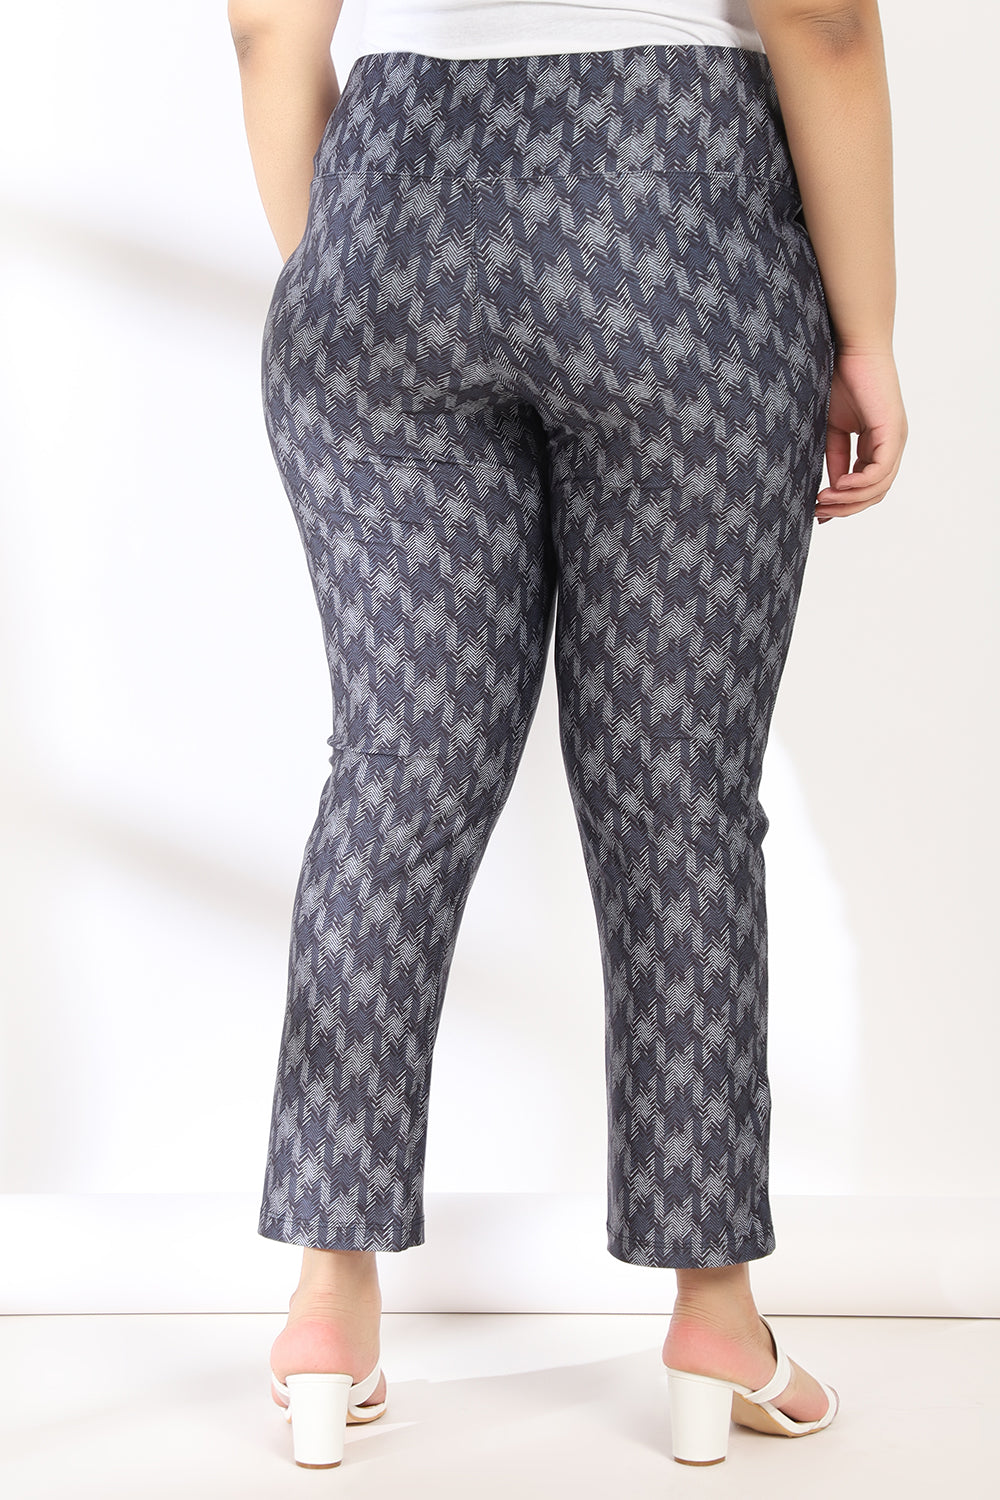 Comfortable Blue White Houndstooth Tummy Shaper Printed Pants